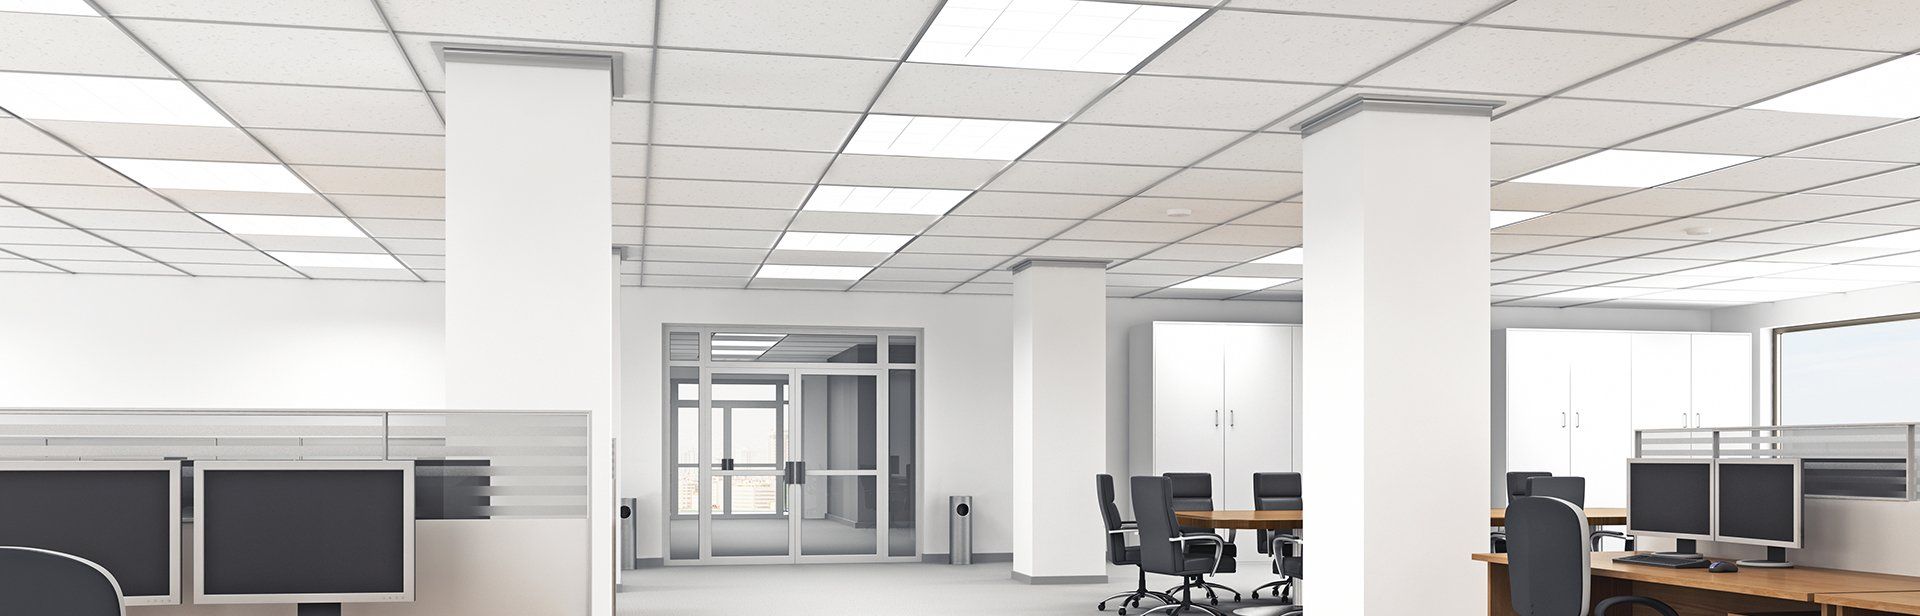 suspended ceiling for a commercial space